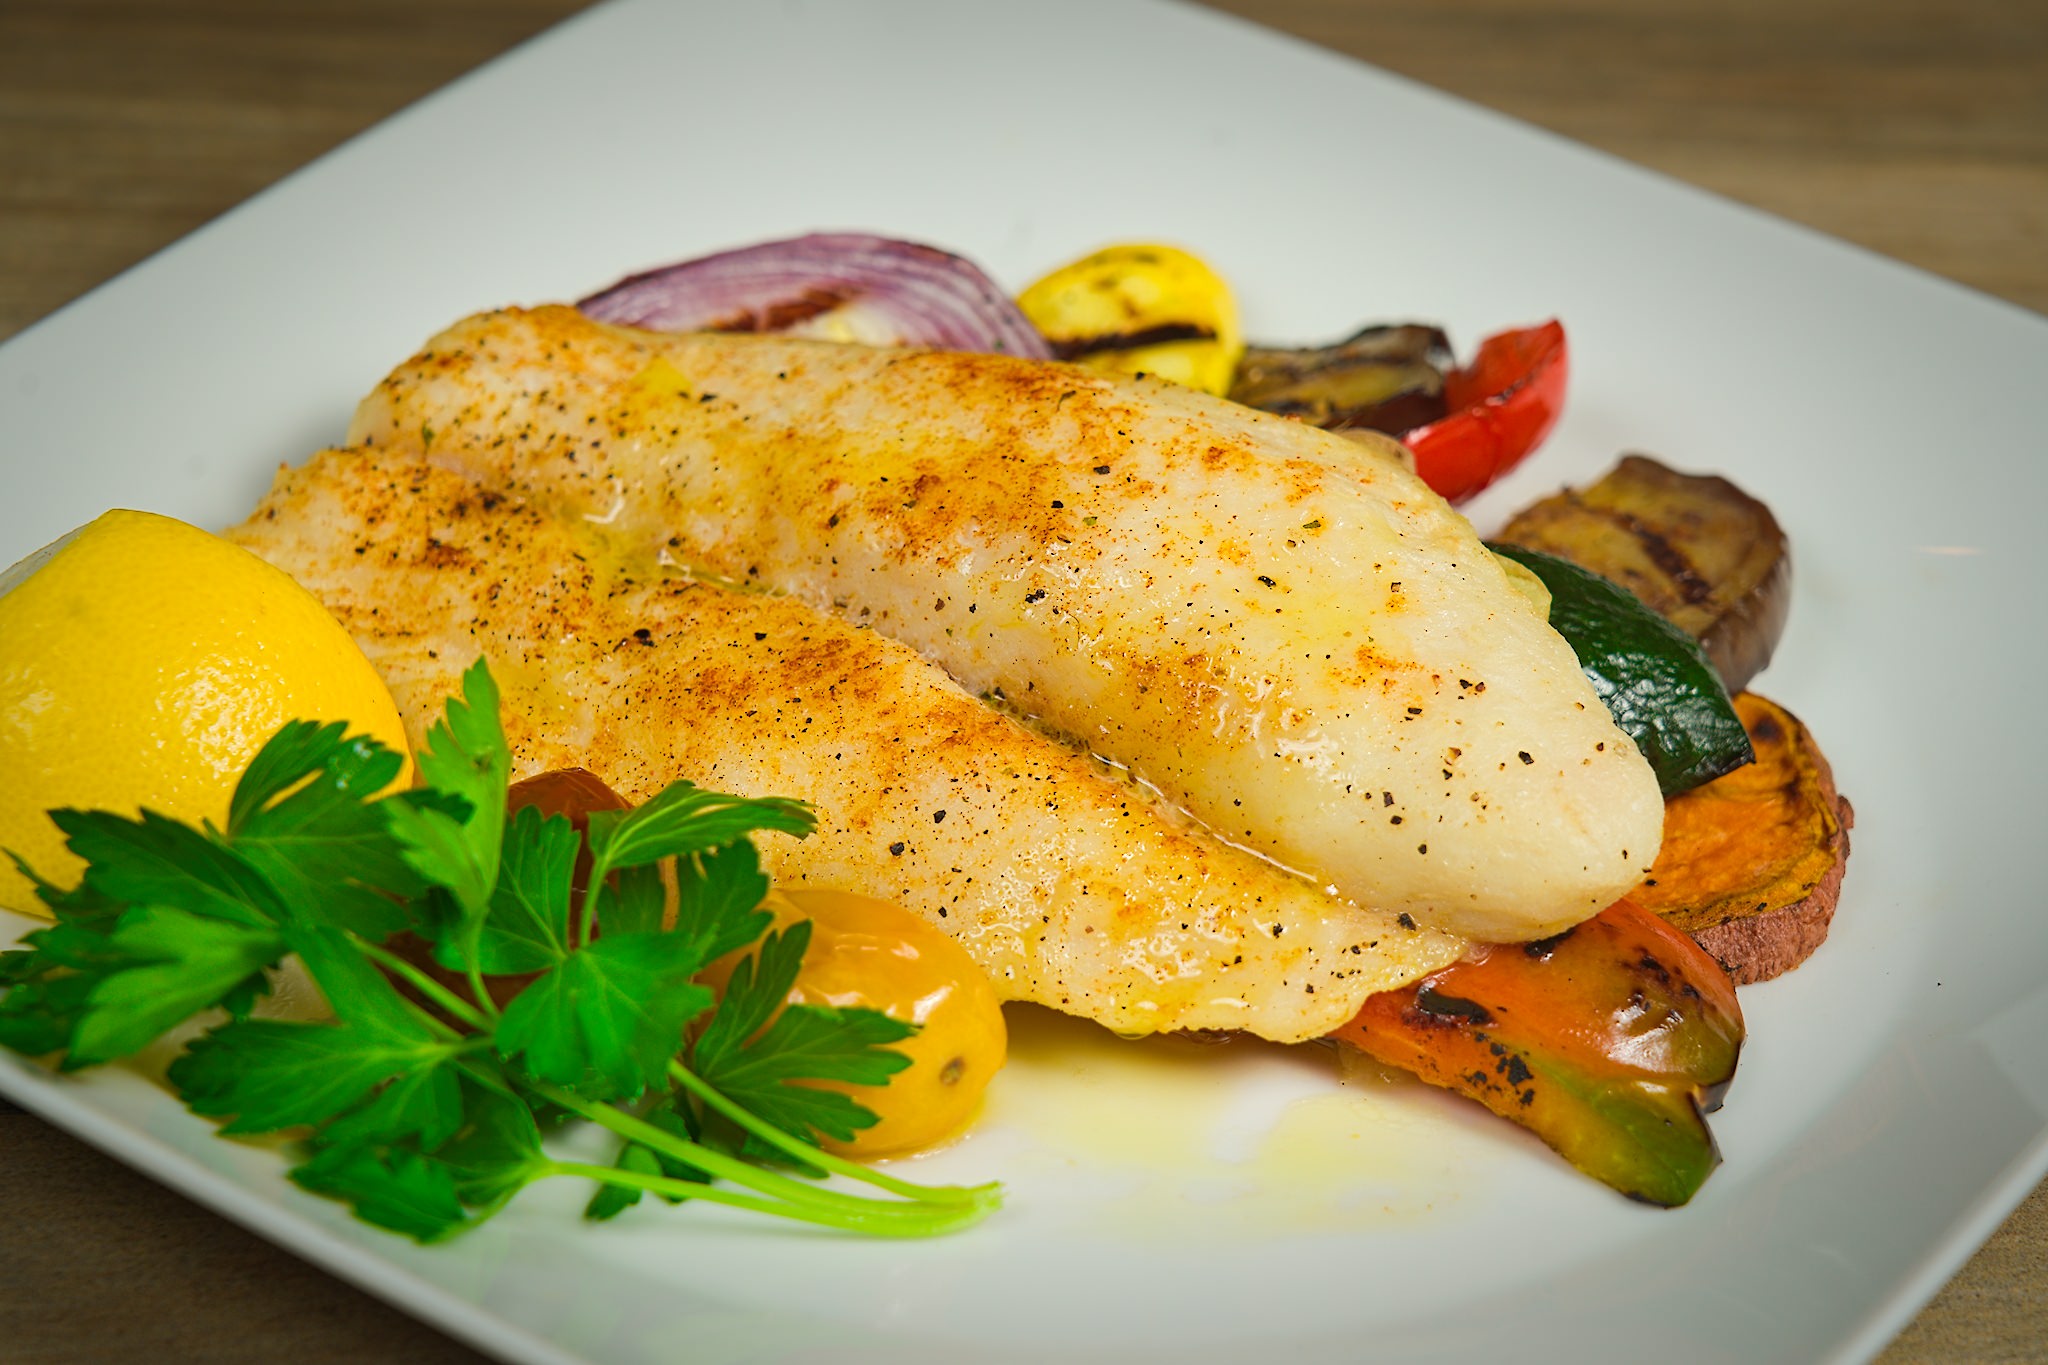 Broiled fillet of Lemon Sole with bread crumbs over grilled vegetables